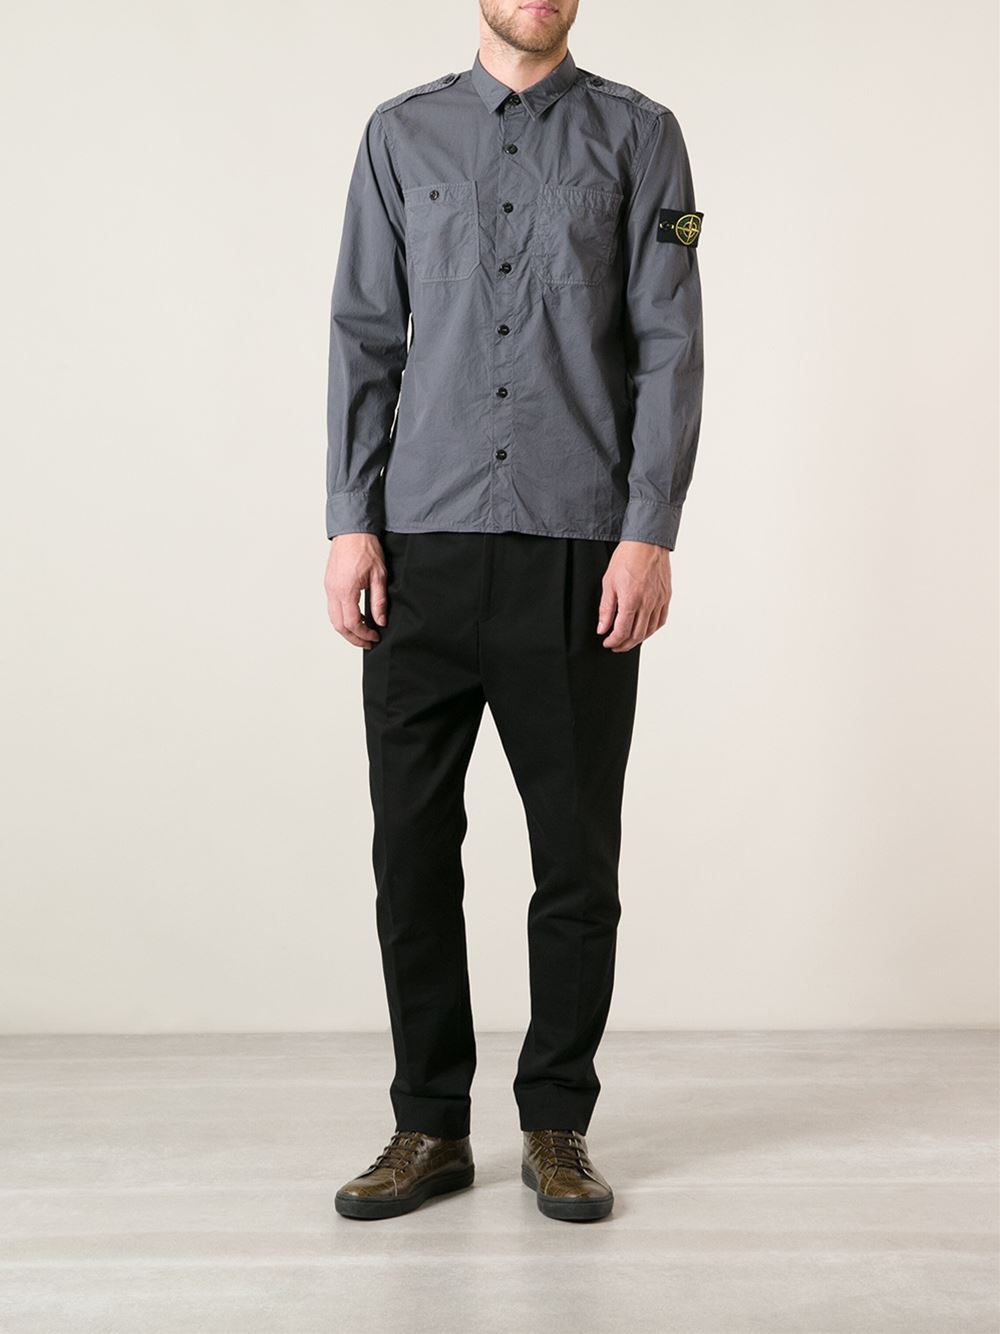 Stone Island Military Style Shirt in Gray for Men | Lyst